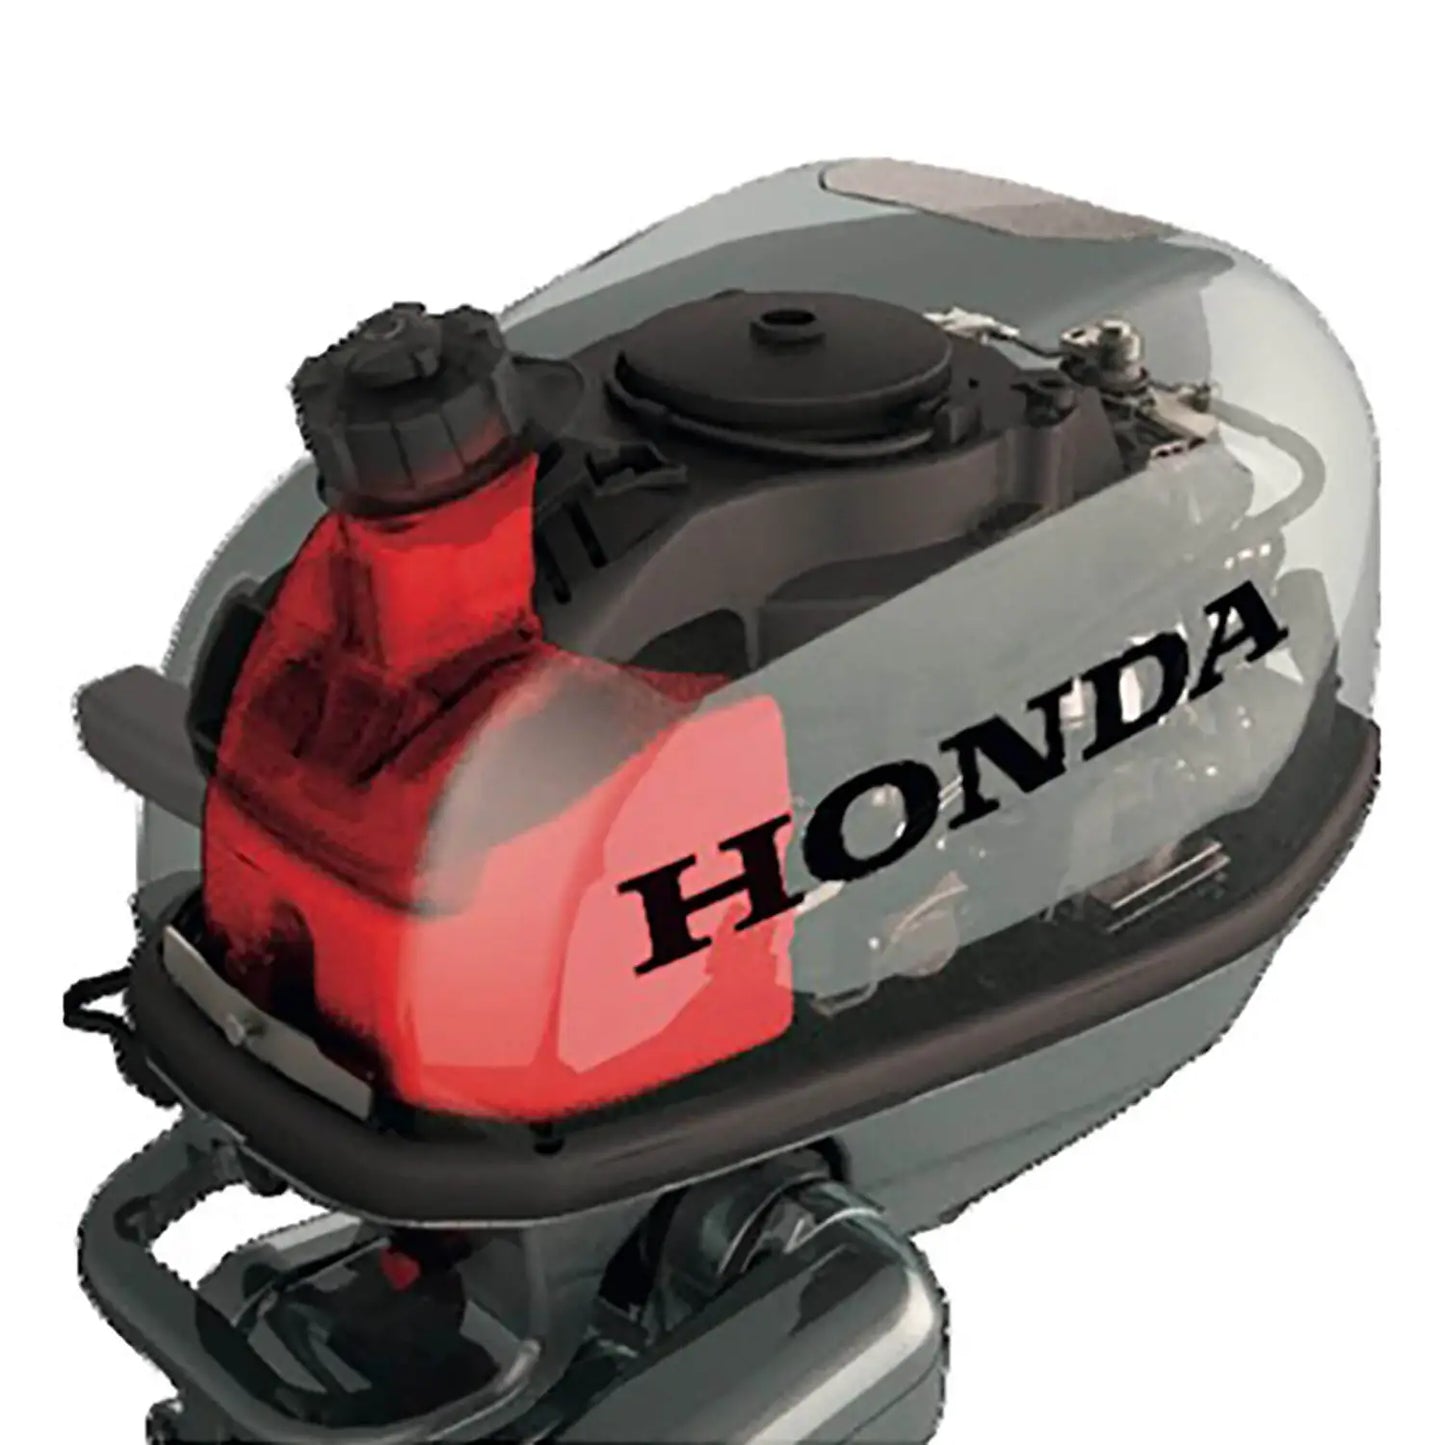 Honda Outboard BF6 SHU 6hp Short Shaft Engine with 6 amp charging coil